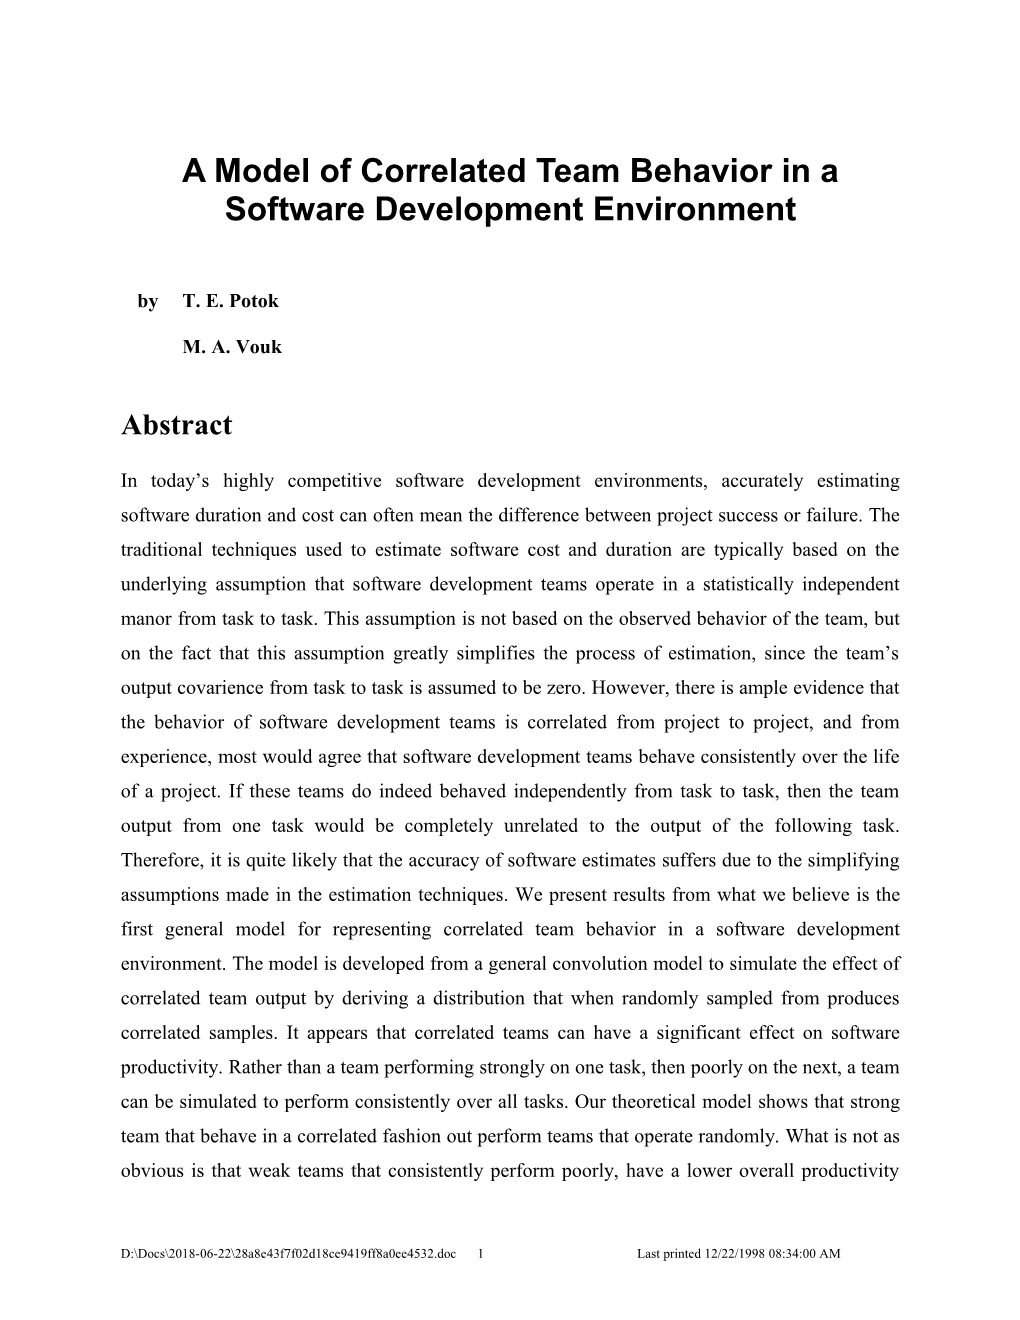 A Model of Correlated Team Behavior in a Software Development Environment